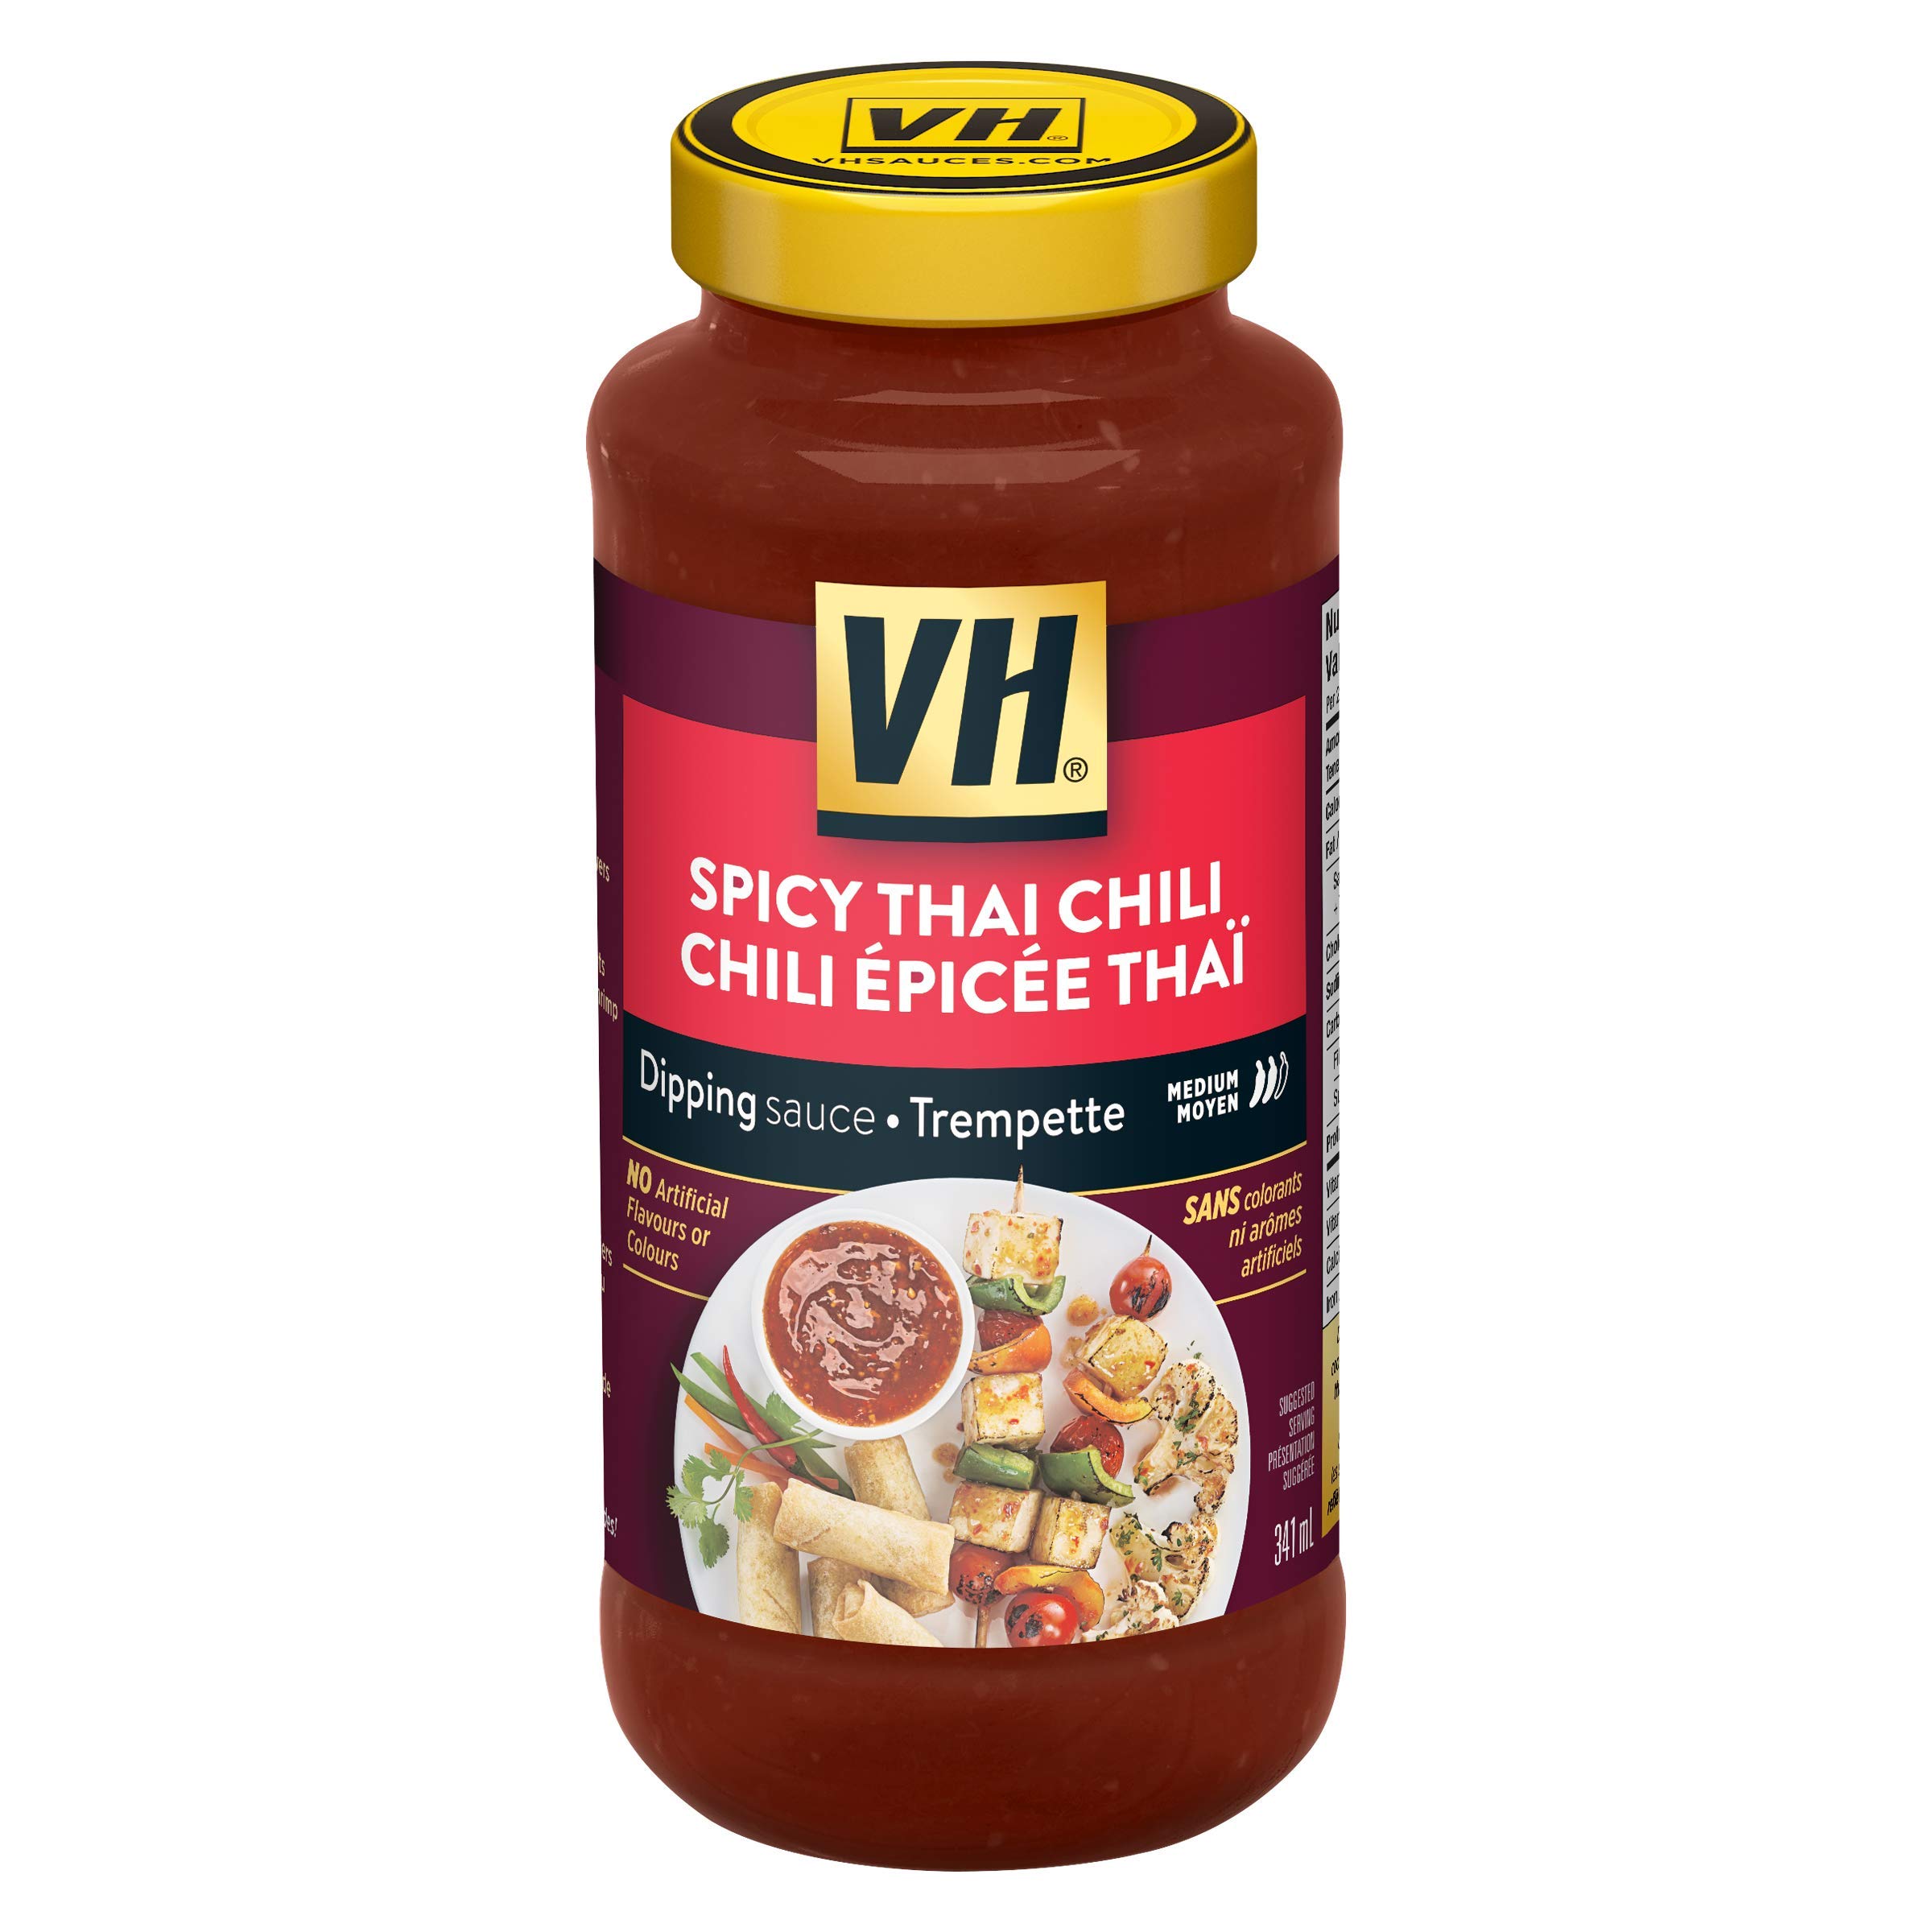 VH Spicy Thai Chili Dipping Sauce (12 Count), 341ml/11.5oz, Jars ...